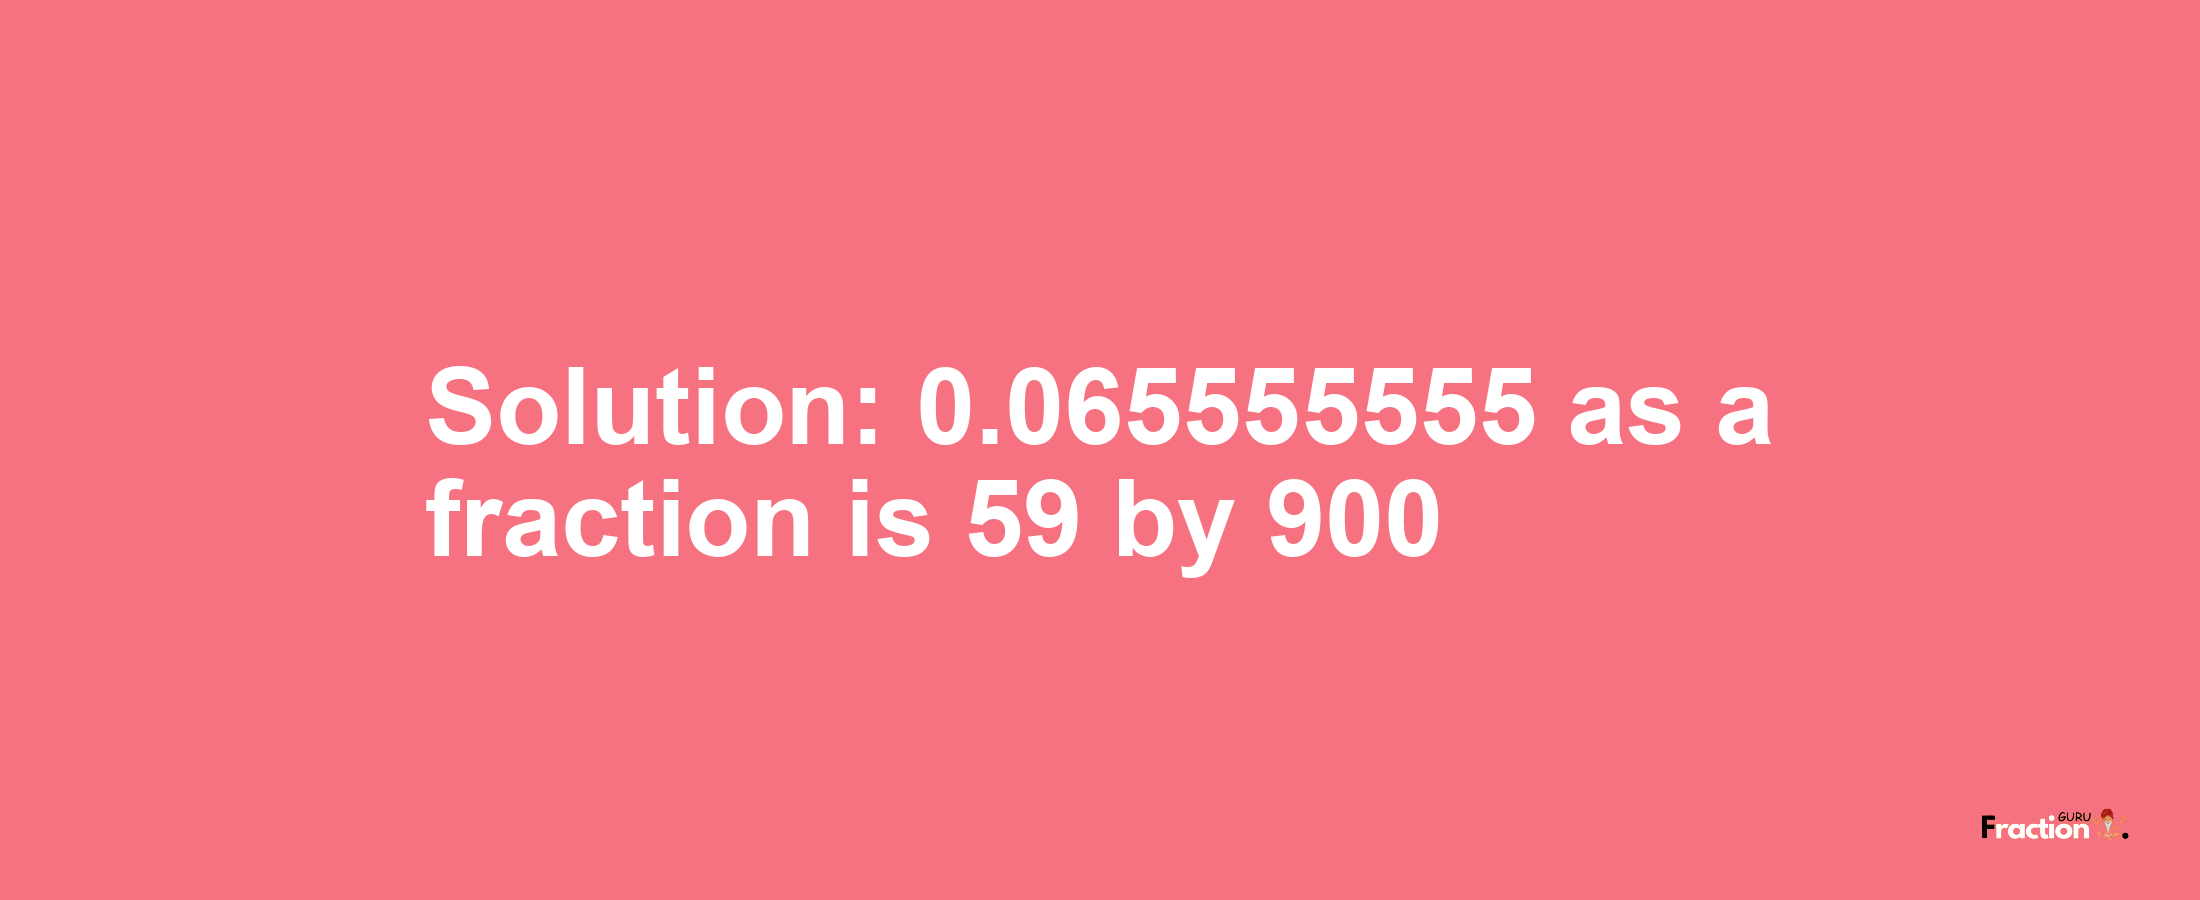 Solution:0.065555555 as a fraction is 59/900